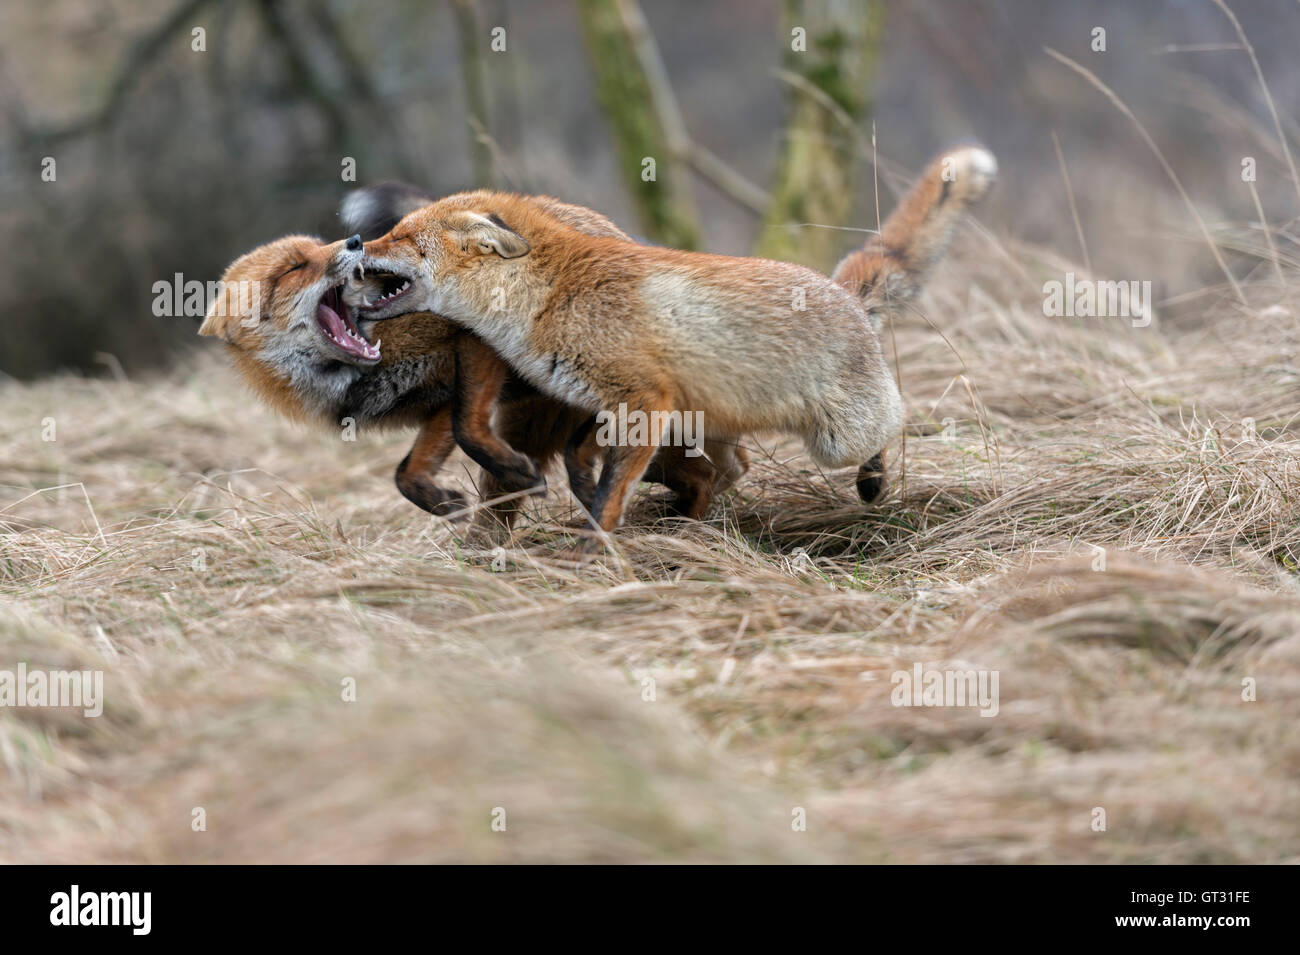 Red Foxes / Rotfuechse ( Vulpes vulpes ) running next to each other, chasing, fighting, biting, showing territorial behavior. Stock Photo